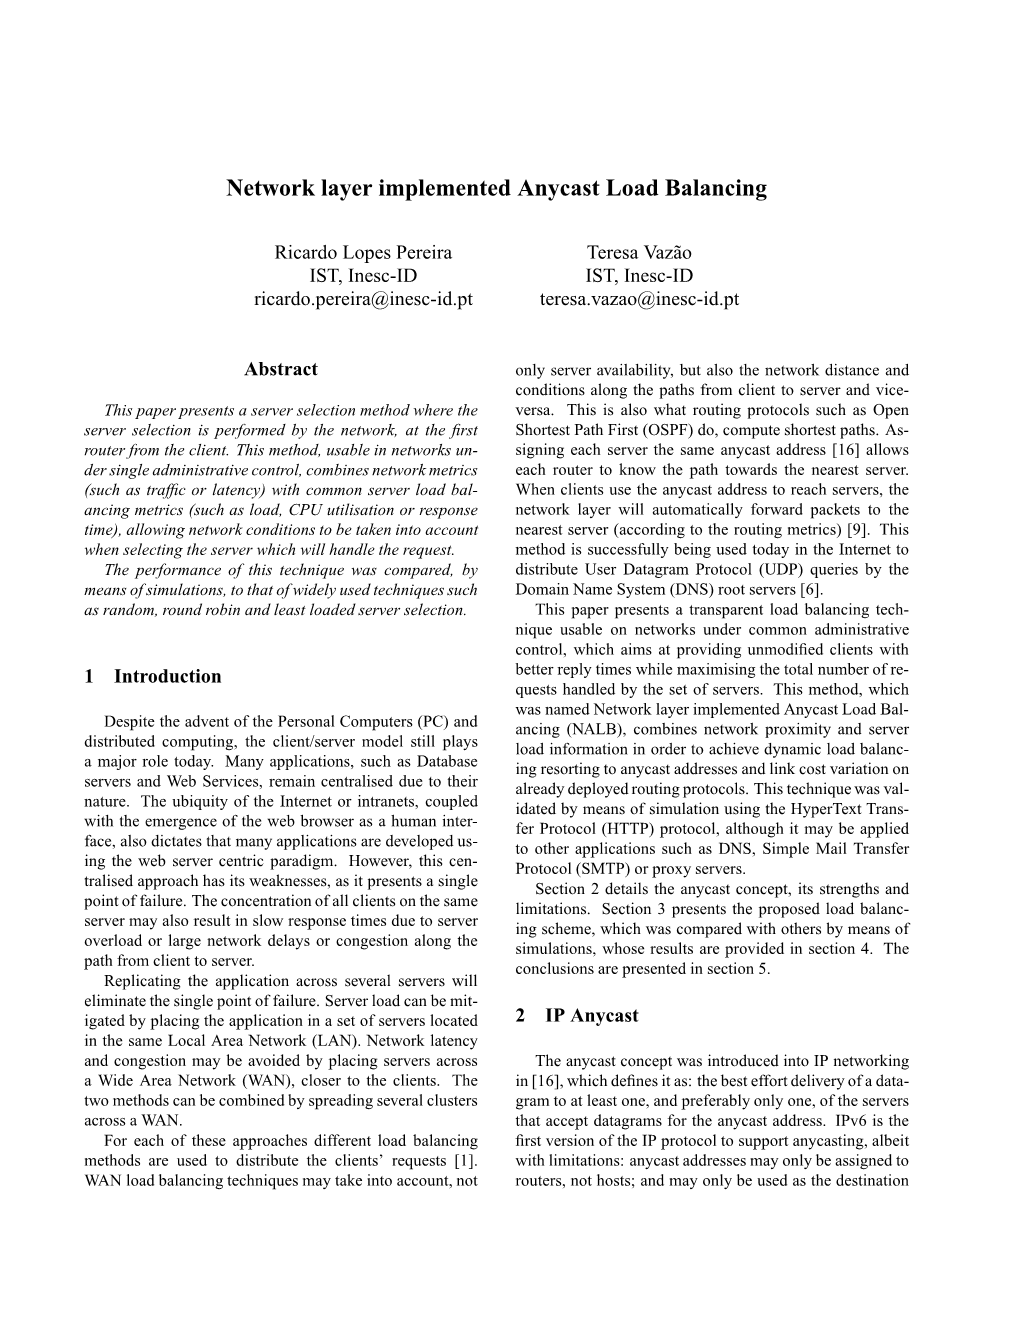 Network Layer Implemented Anycast Load Balancing